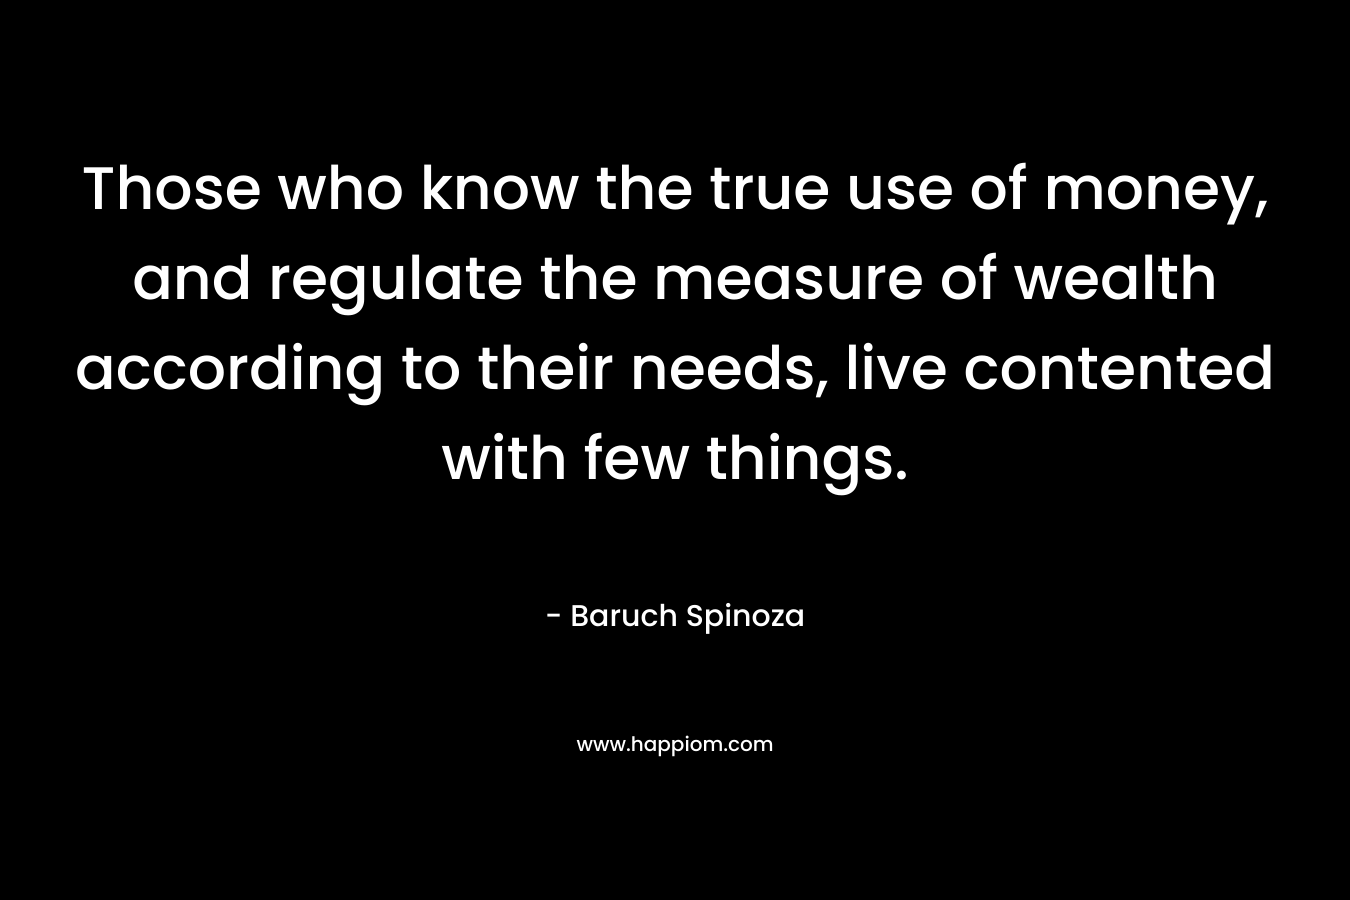 Those who know the true use of money, and regulate the measure of wealth according to their needs, live contented with few things. – Baruch Spinoza